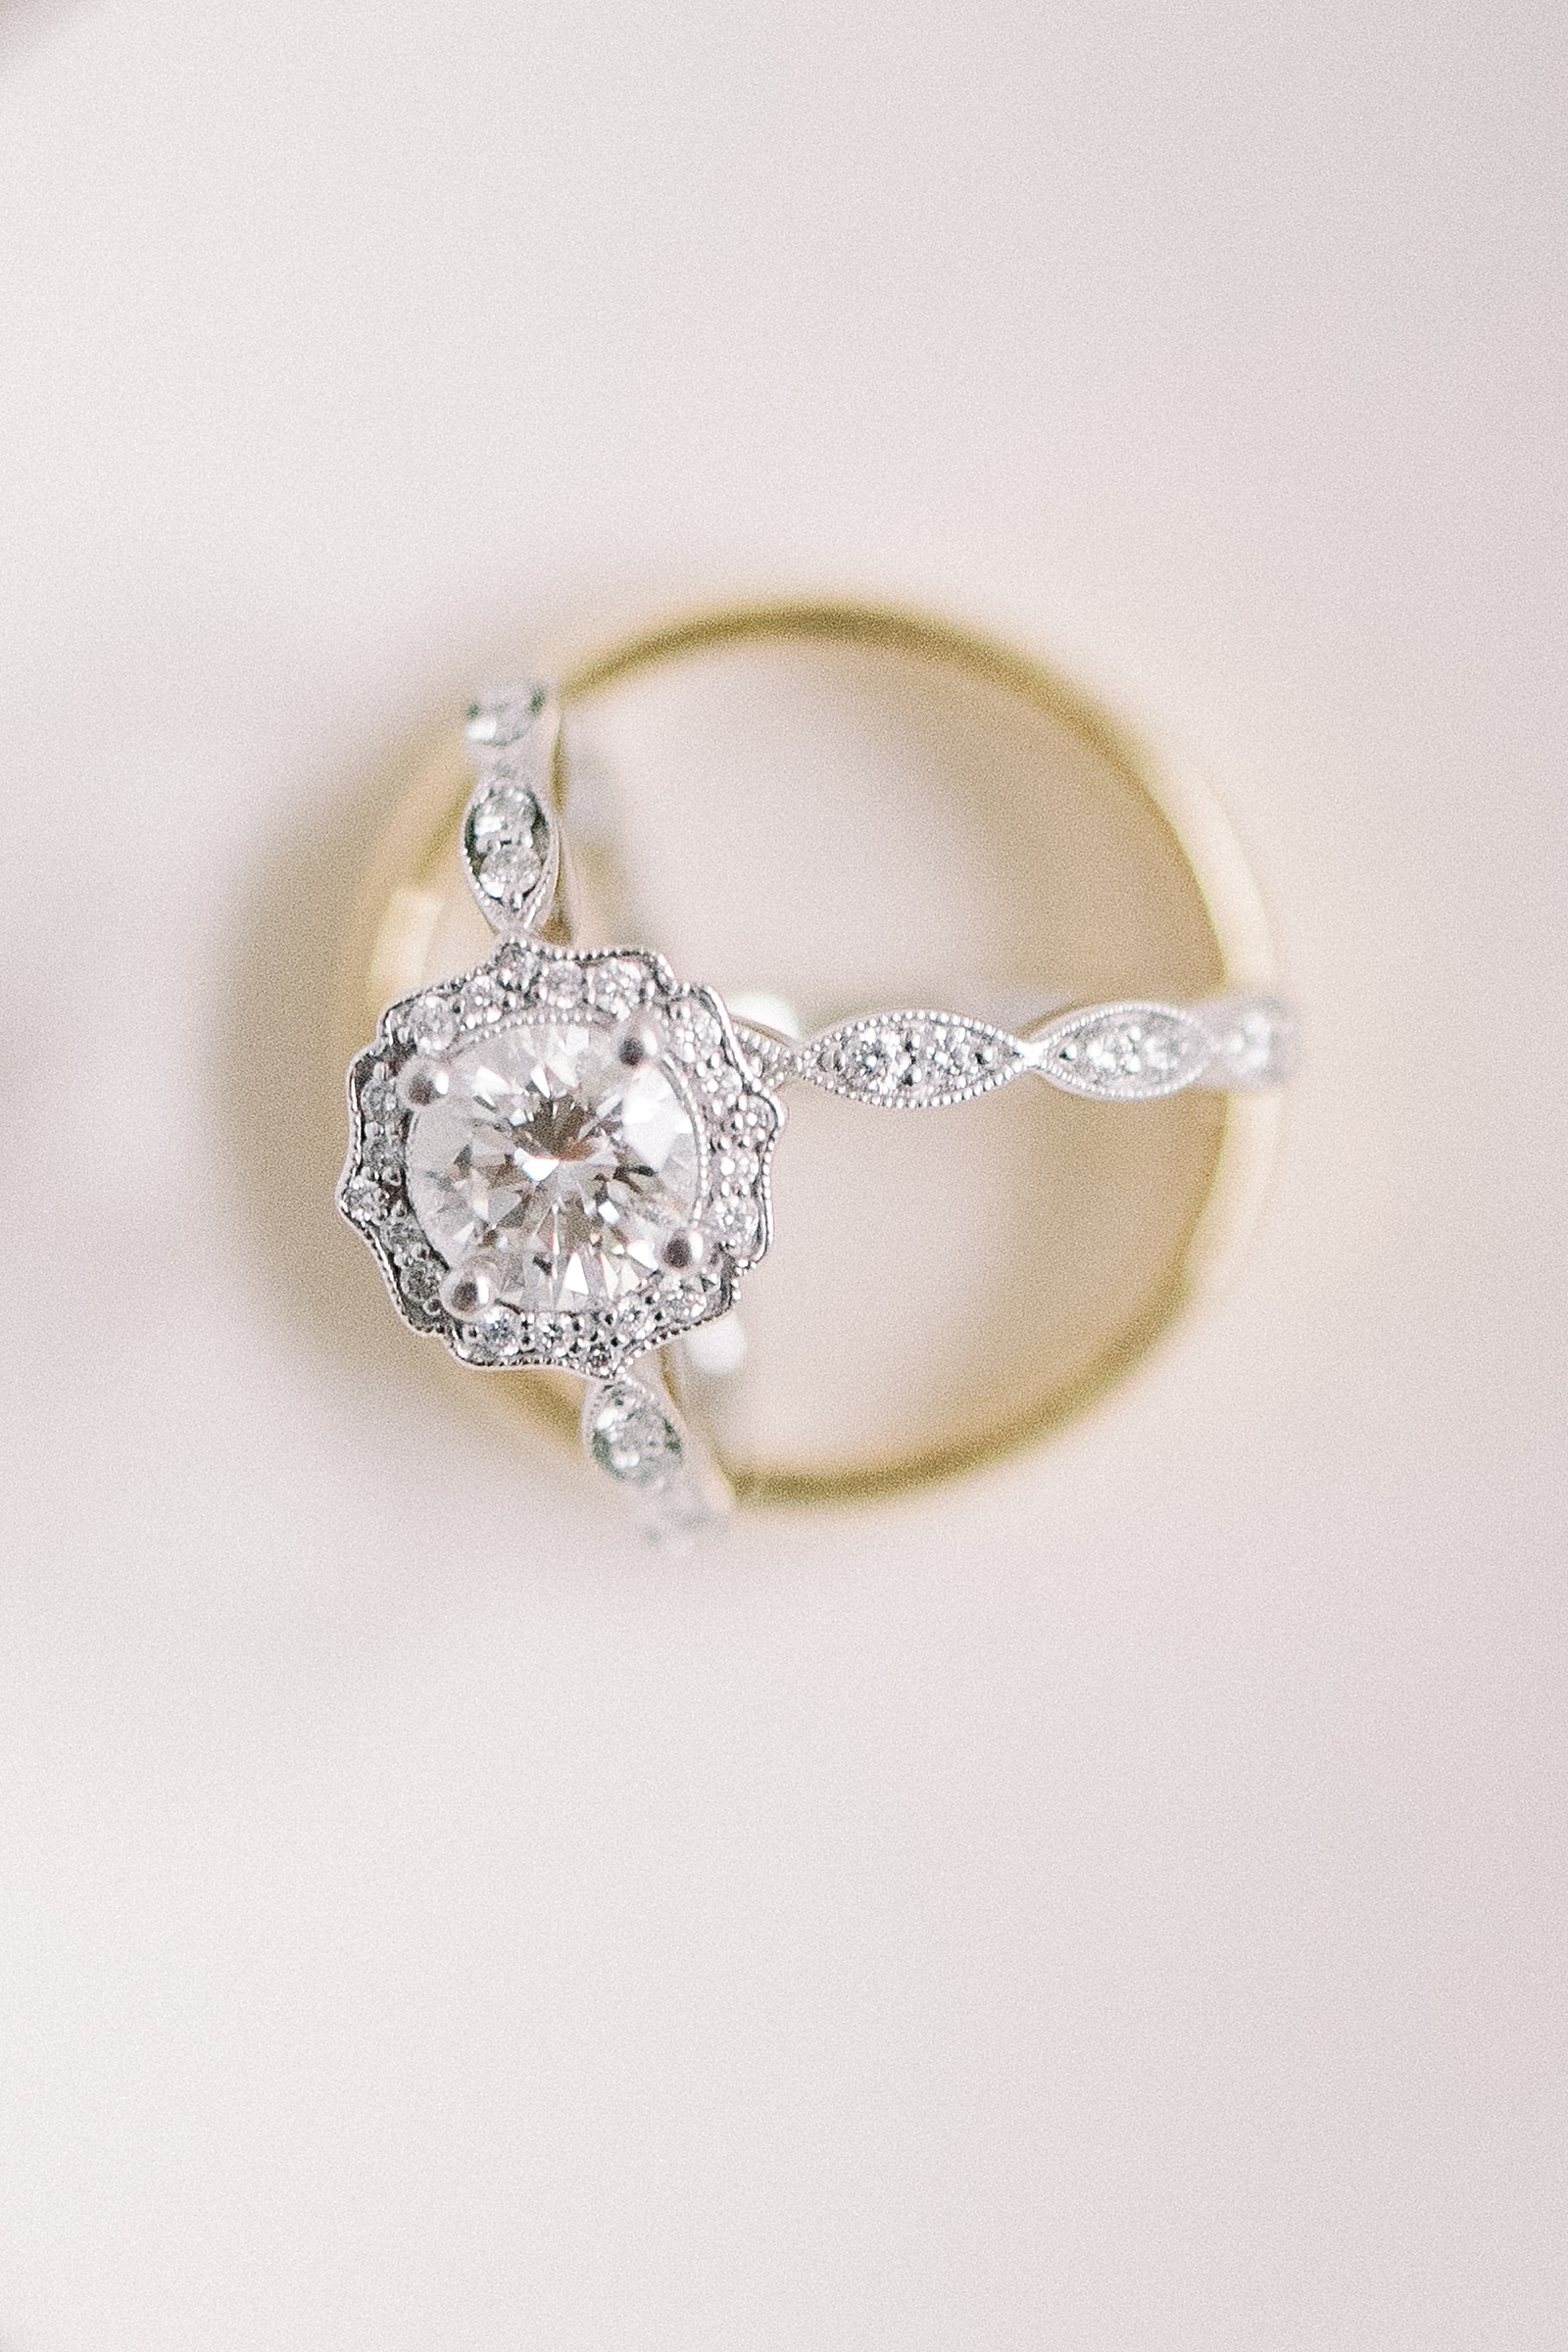 Up close image of brides rings nestled in groom's ring.